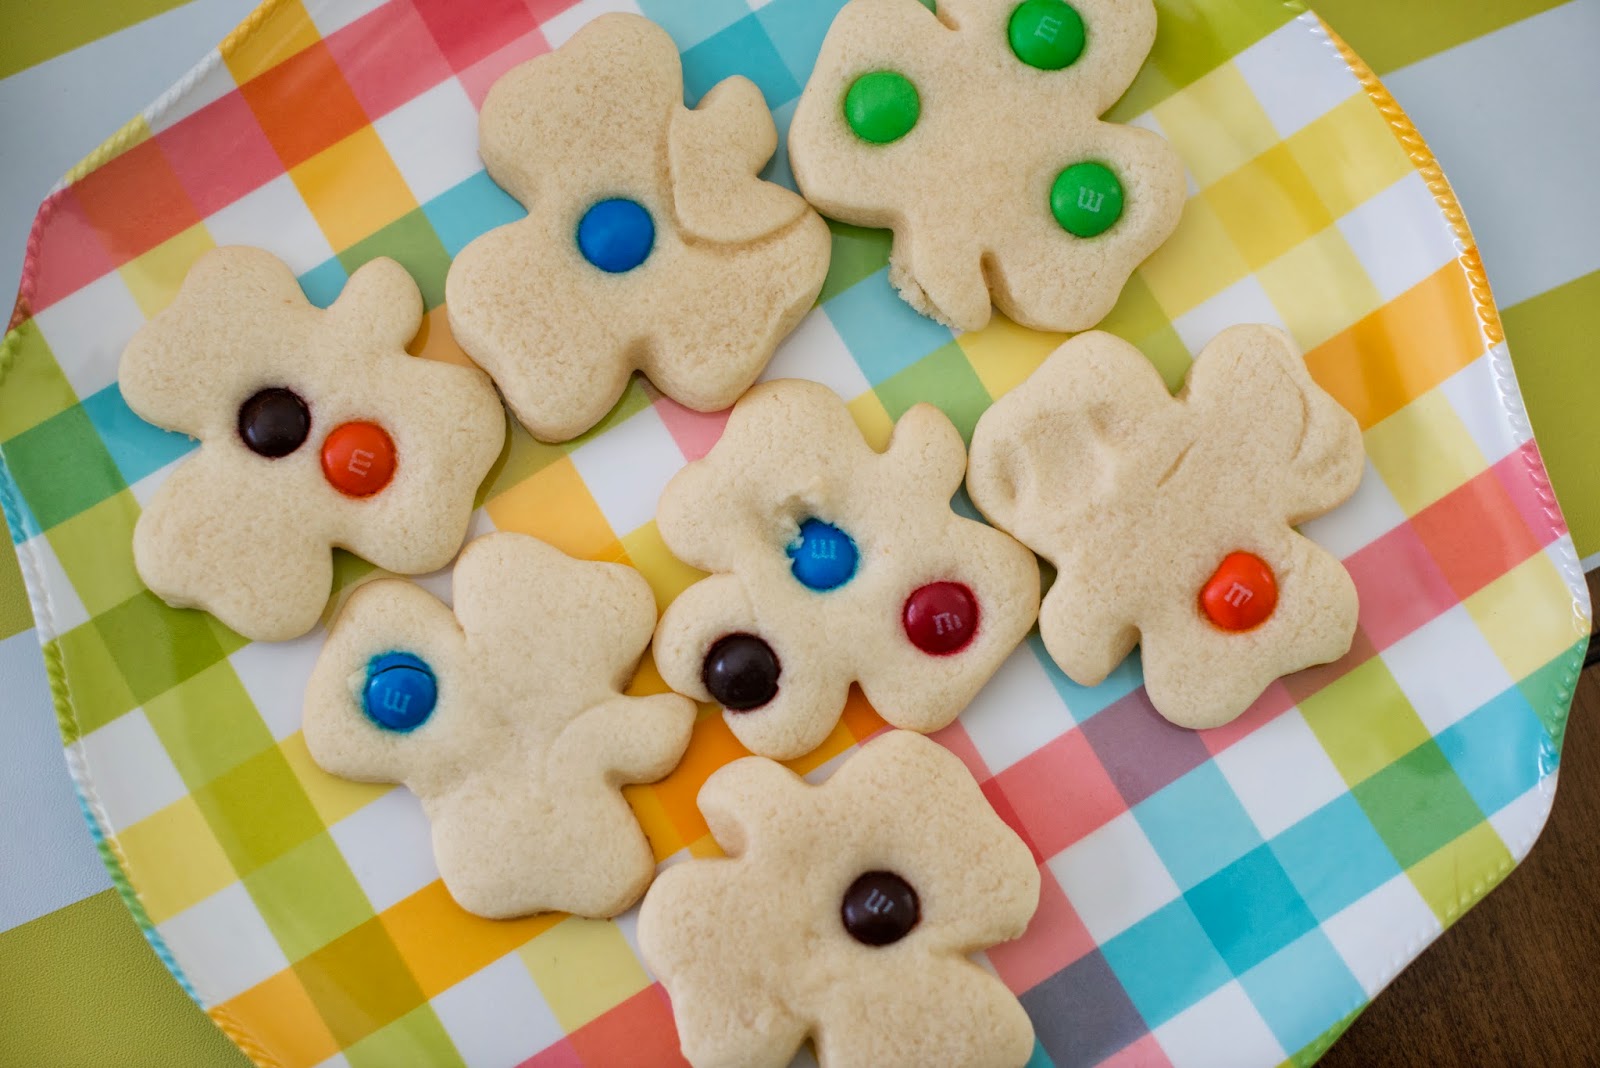 Saint Patrick's Day Kid Party Ideas--make sugar cookies and decorate with m&ms